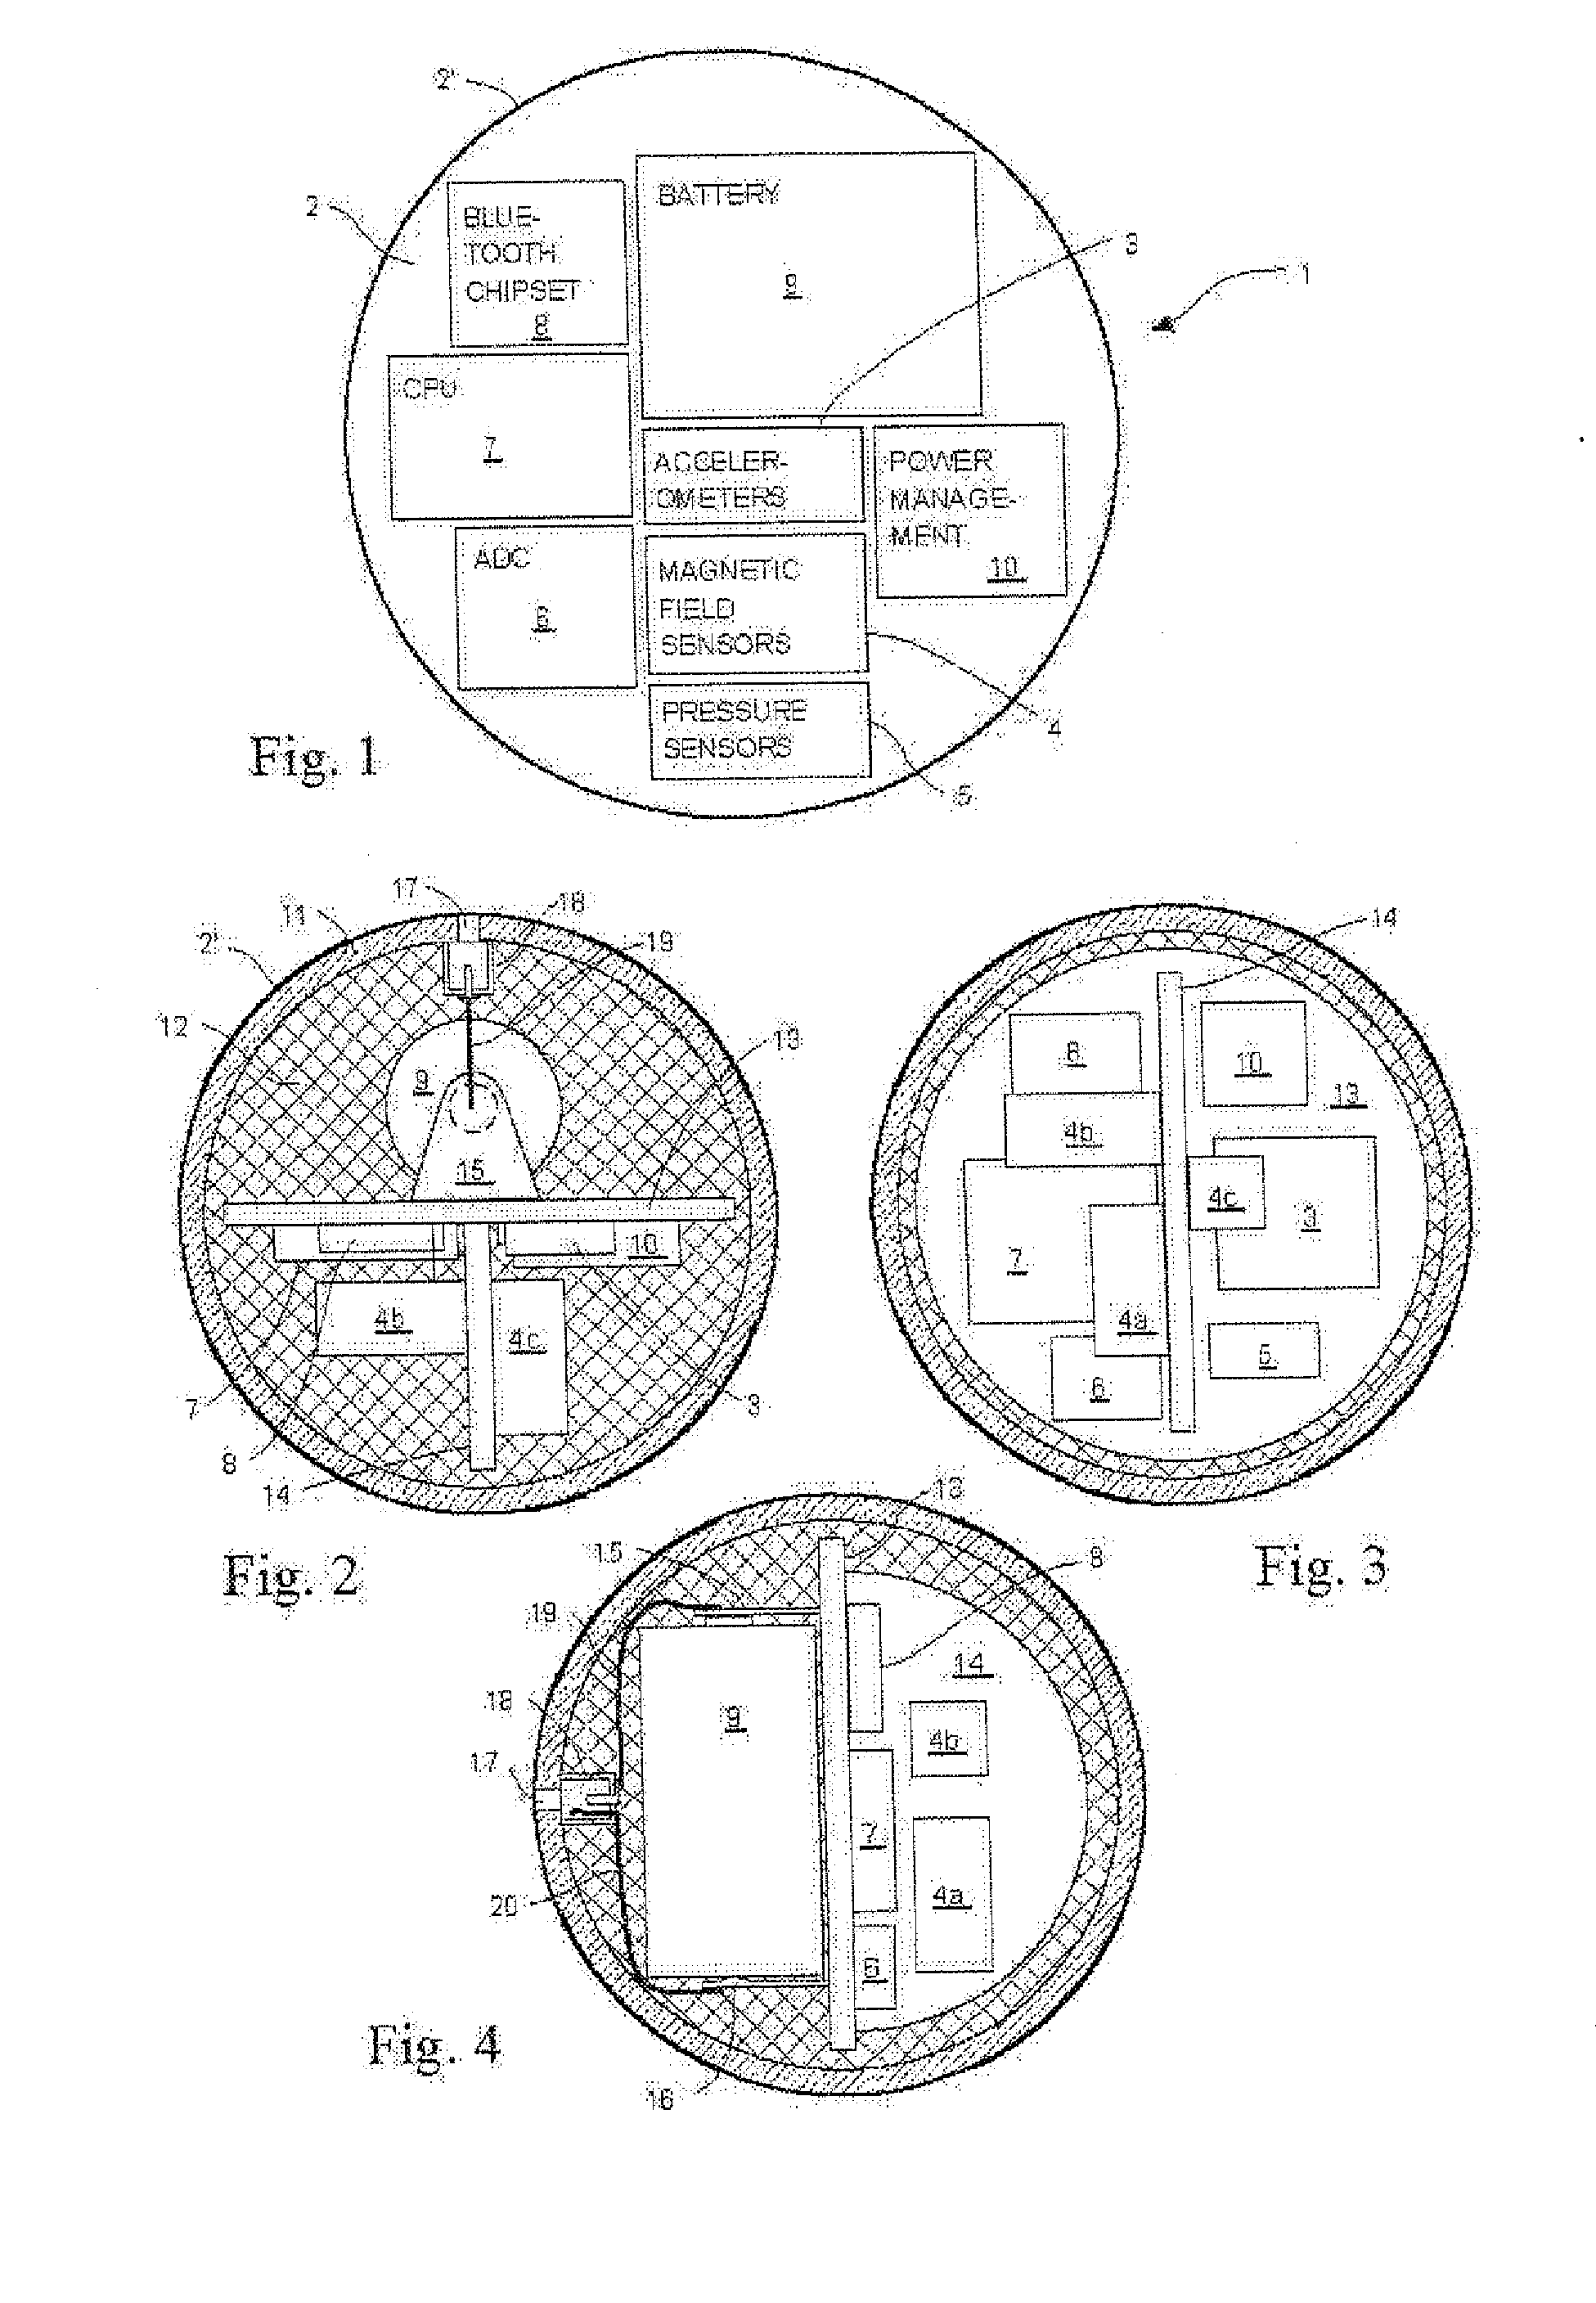 User operable pointing device such as mouse